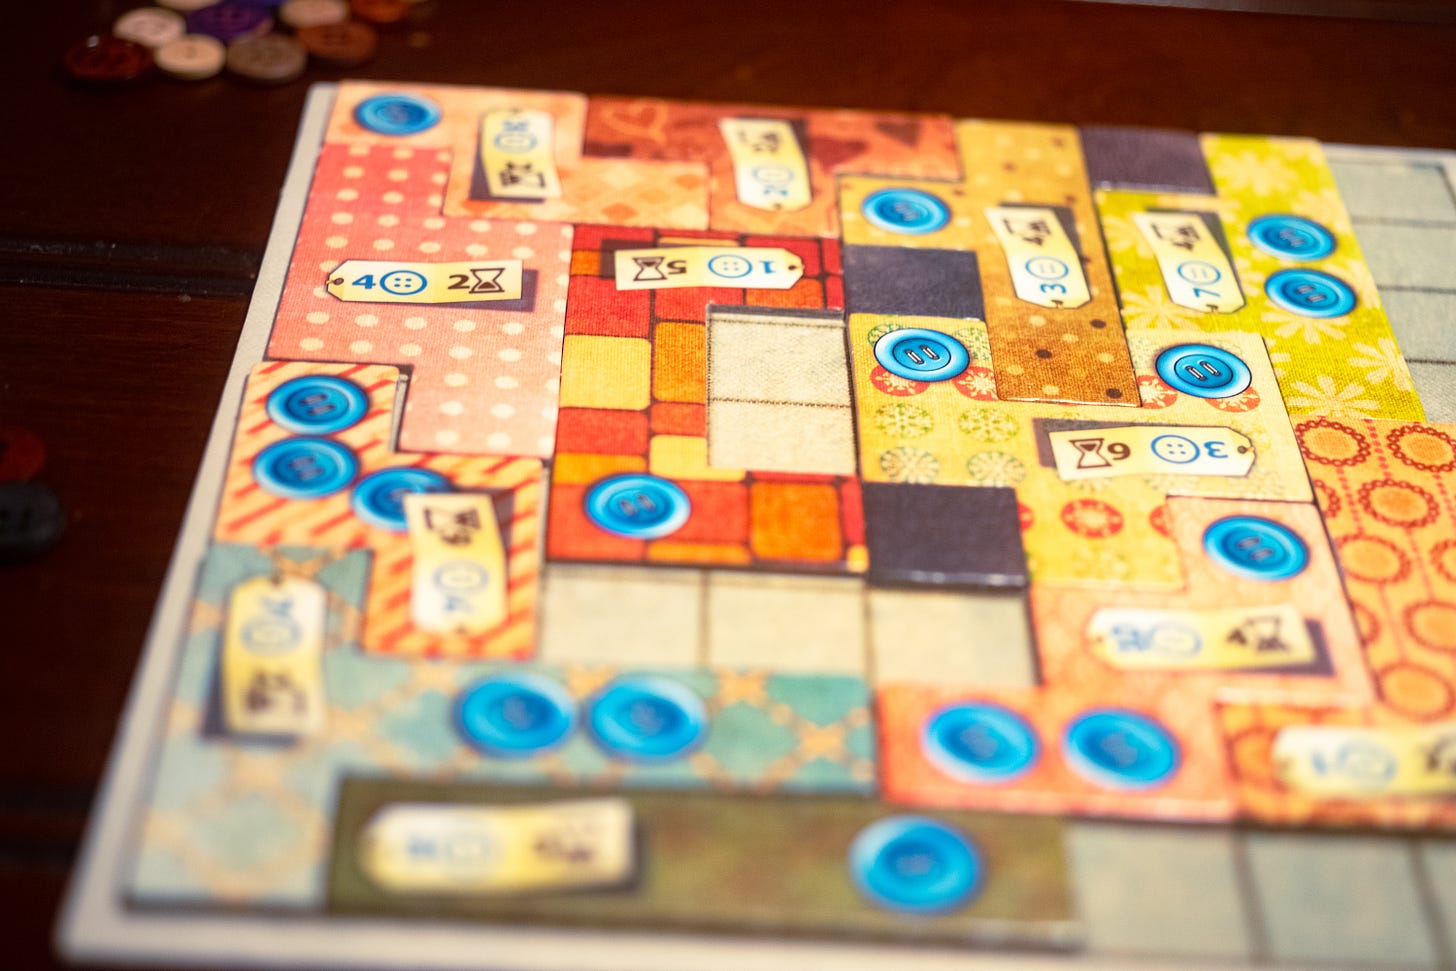 The tile-laying game Patchwork